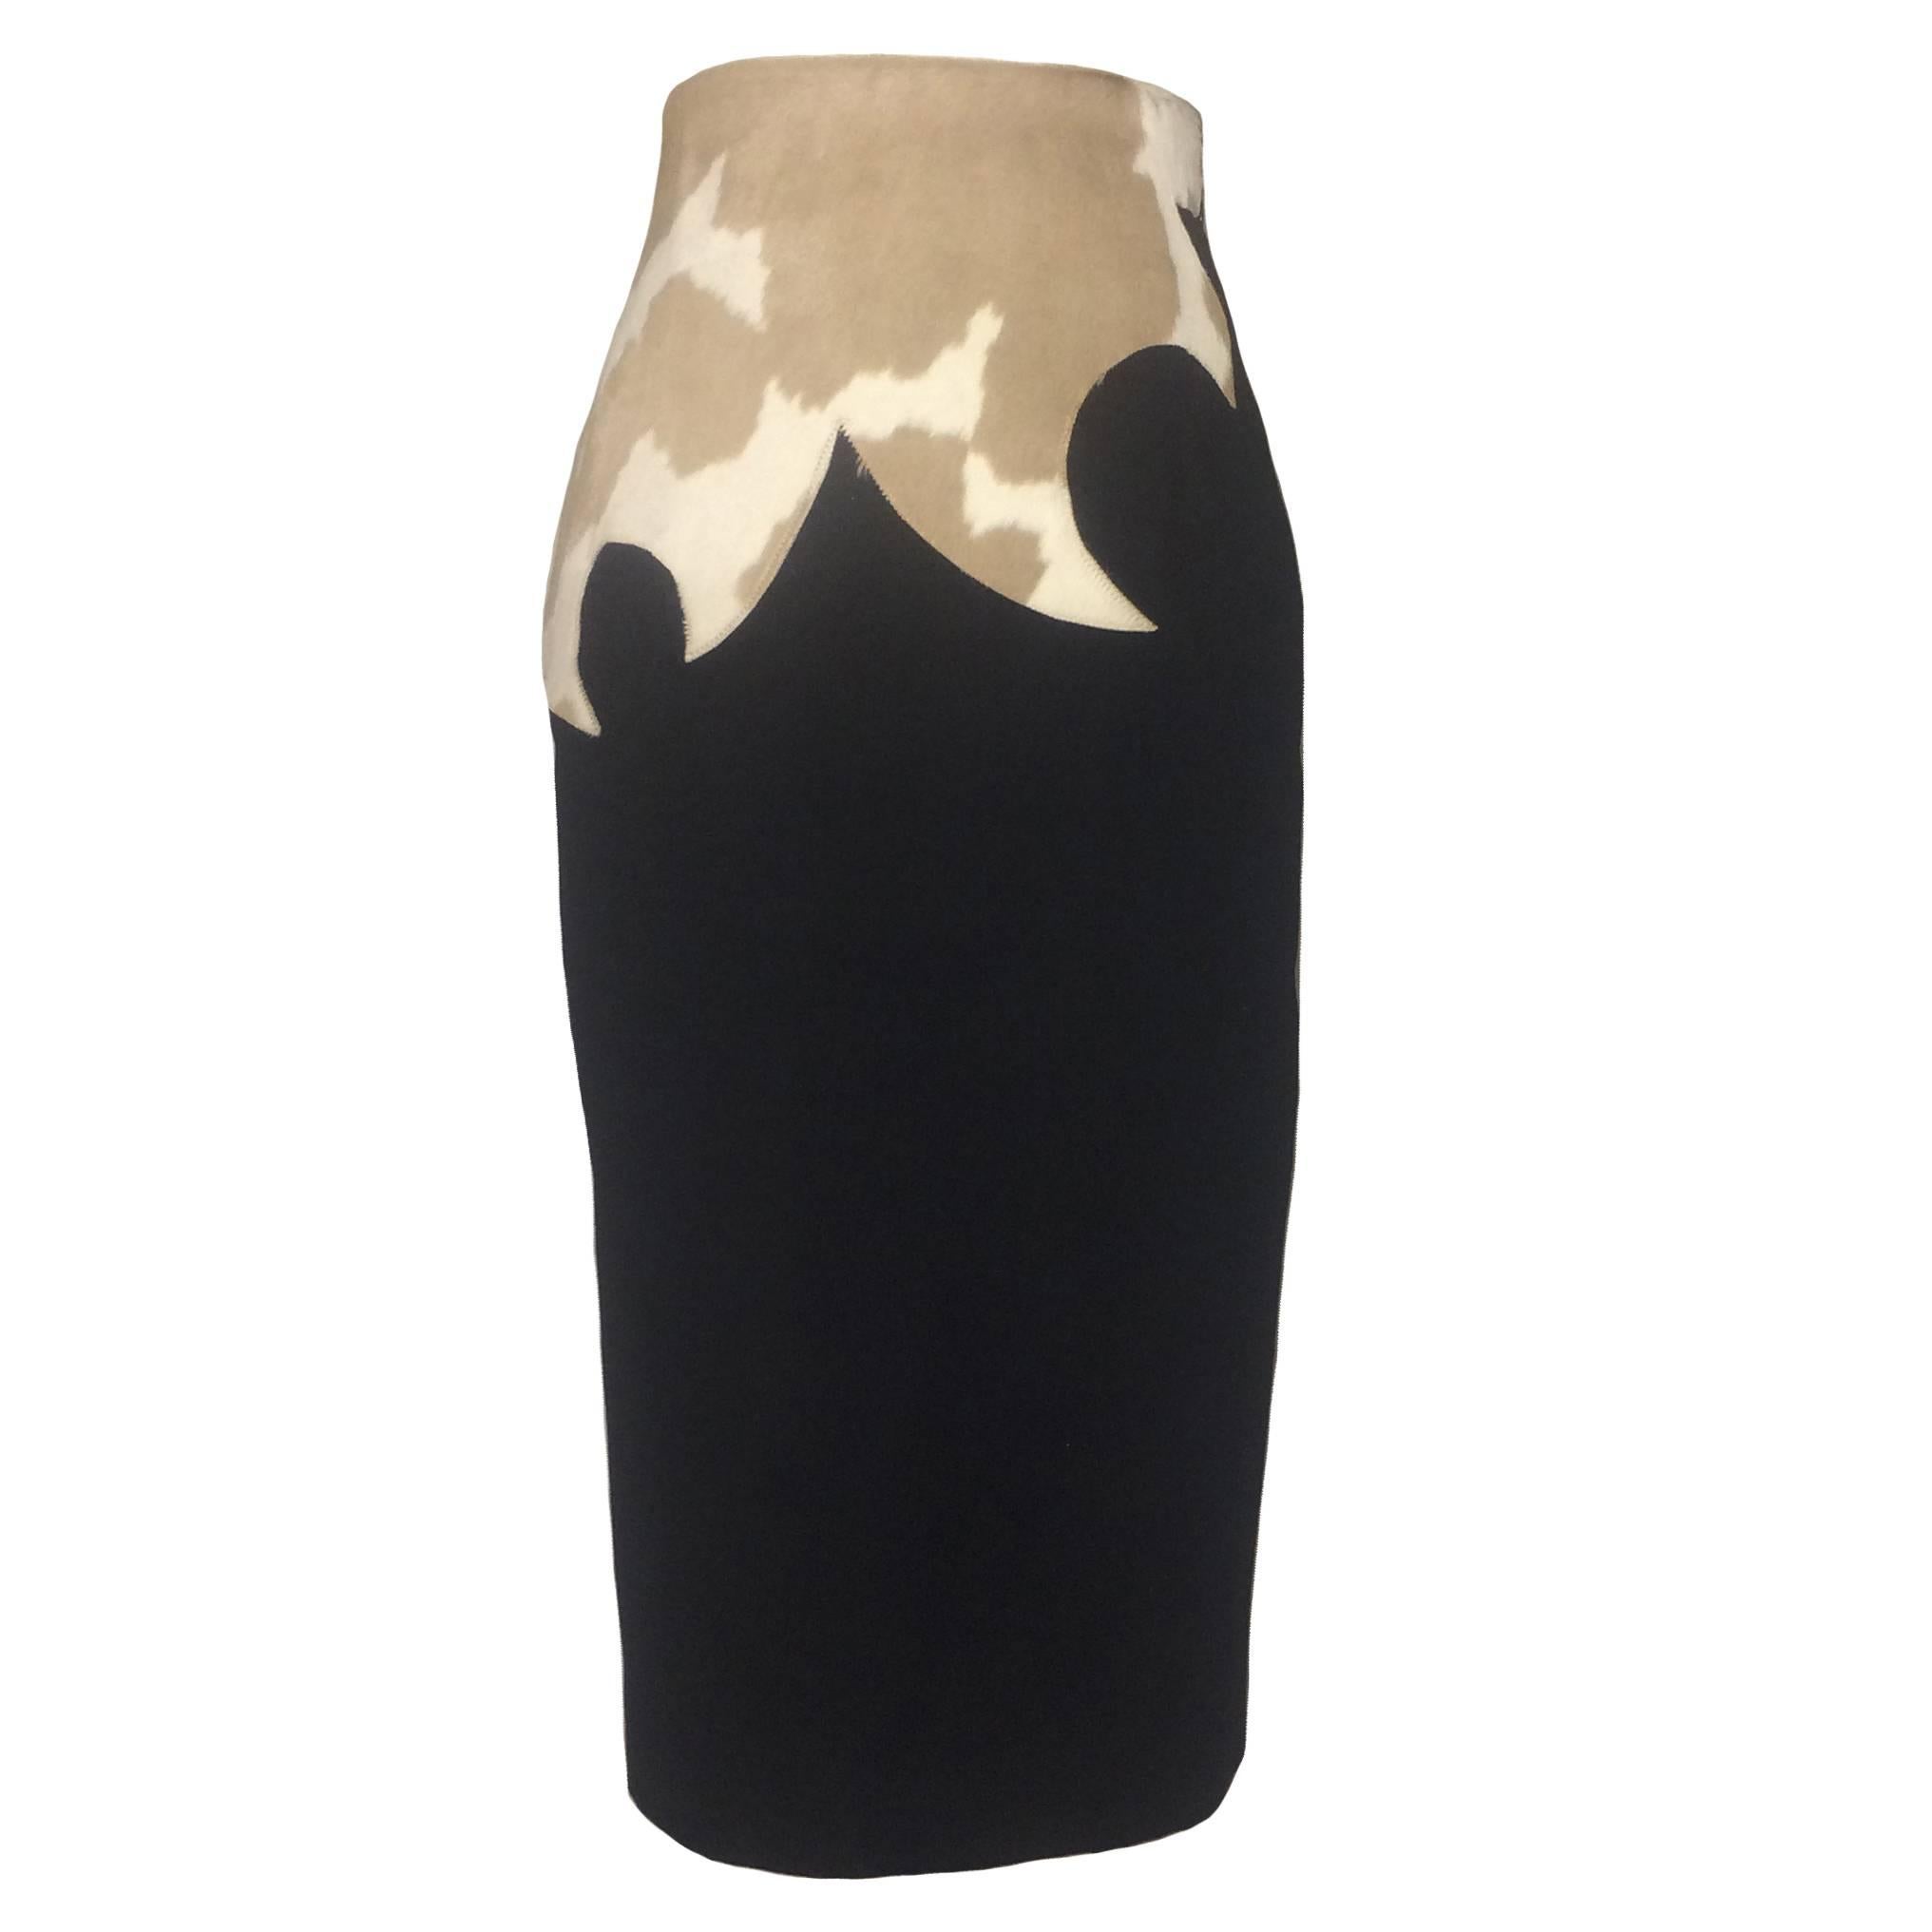 Alexander McQueen 1997 It's a Jungle Out There Black Pony Pencil Skirt